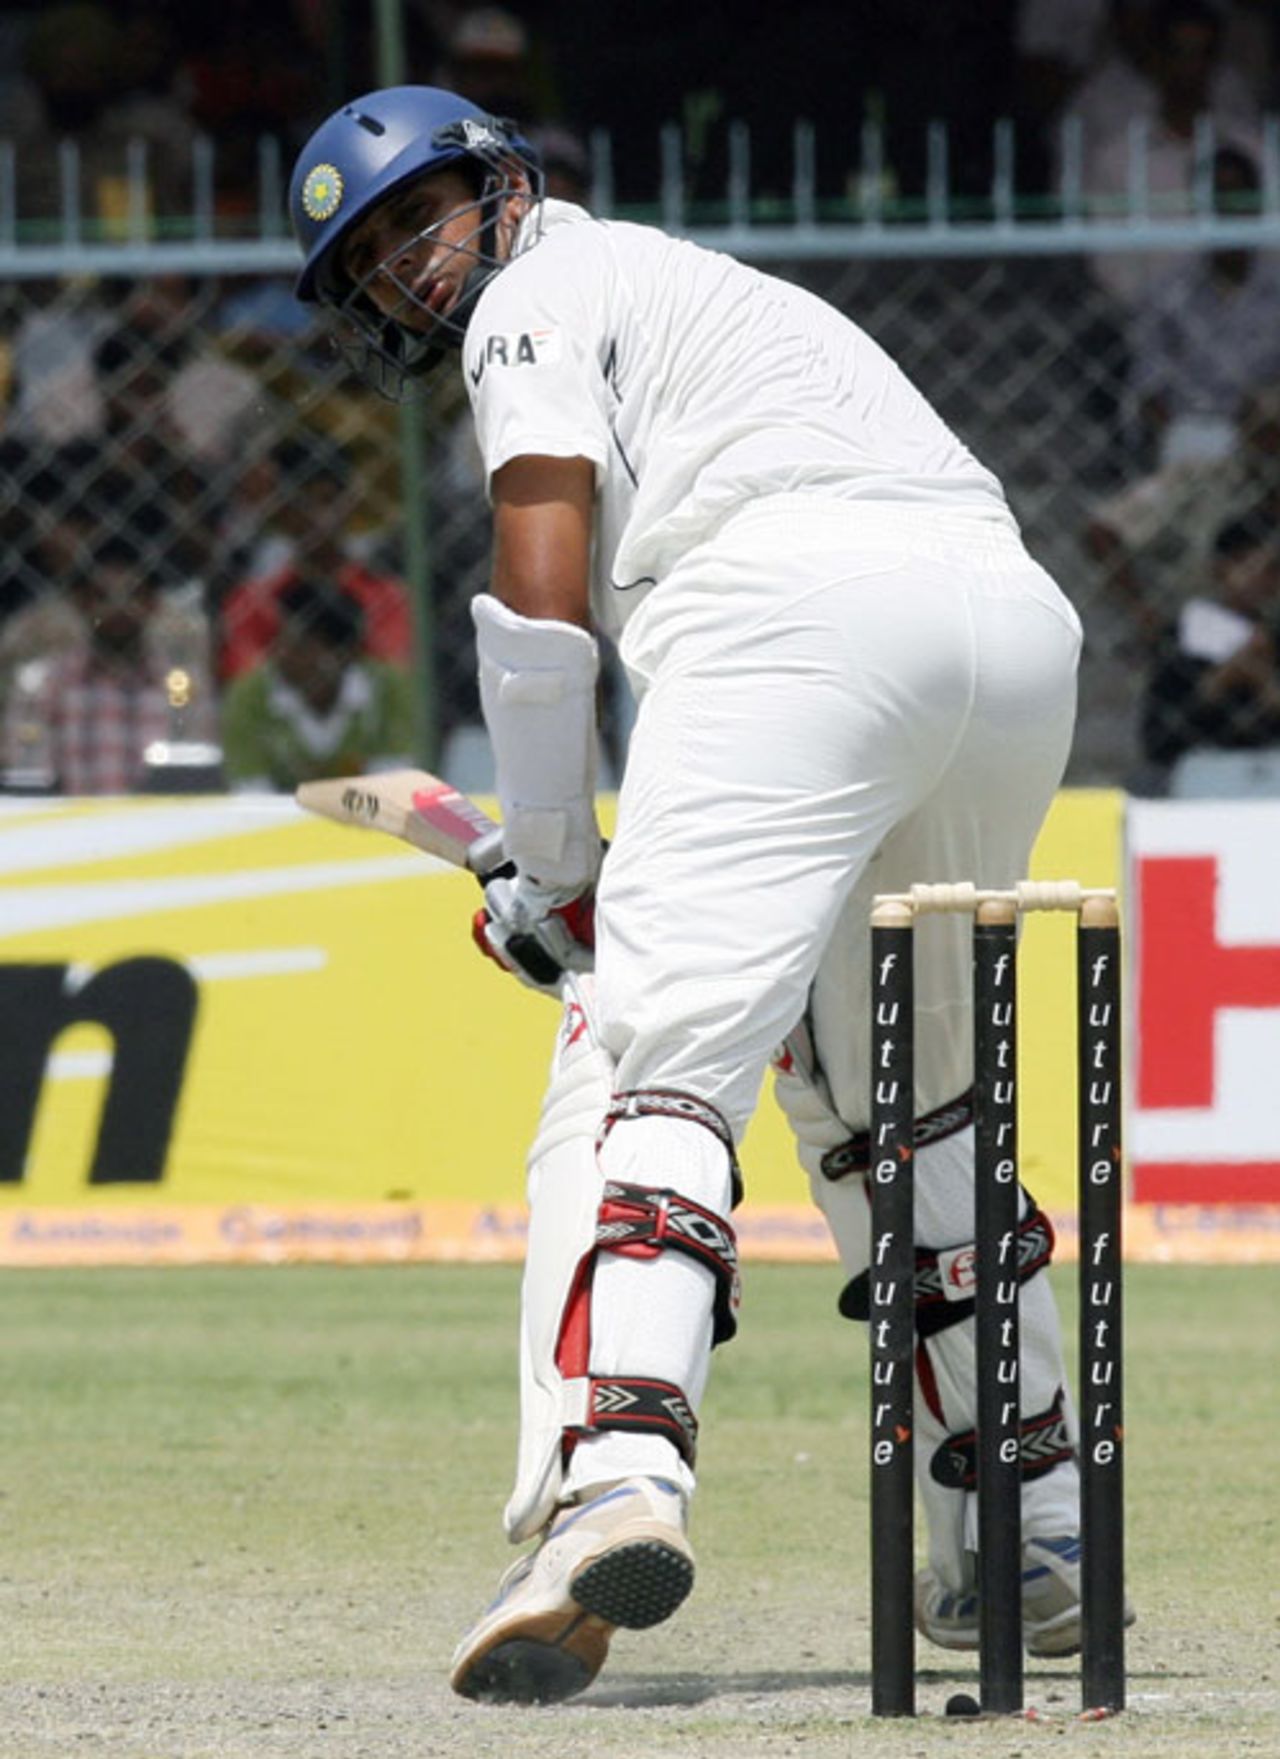 Rahul Dravid plays the ball to the fine-leg boundary, India v South Africa, 3rd Test, Kanpur, 2nd day, April 12, 2008 